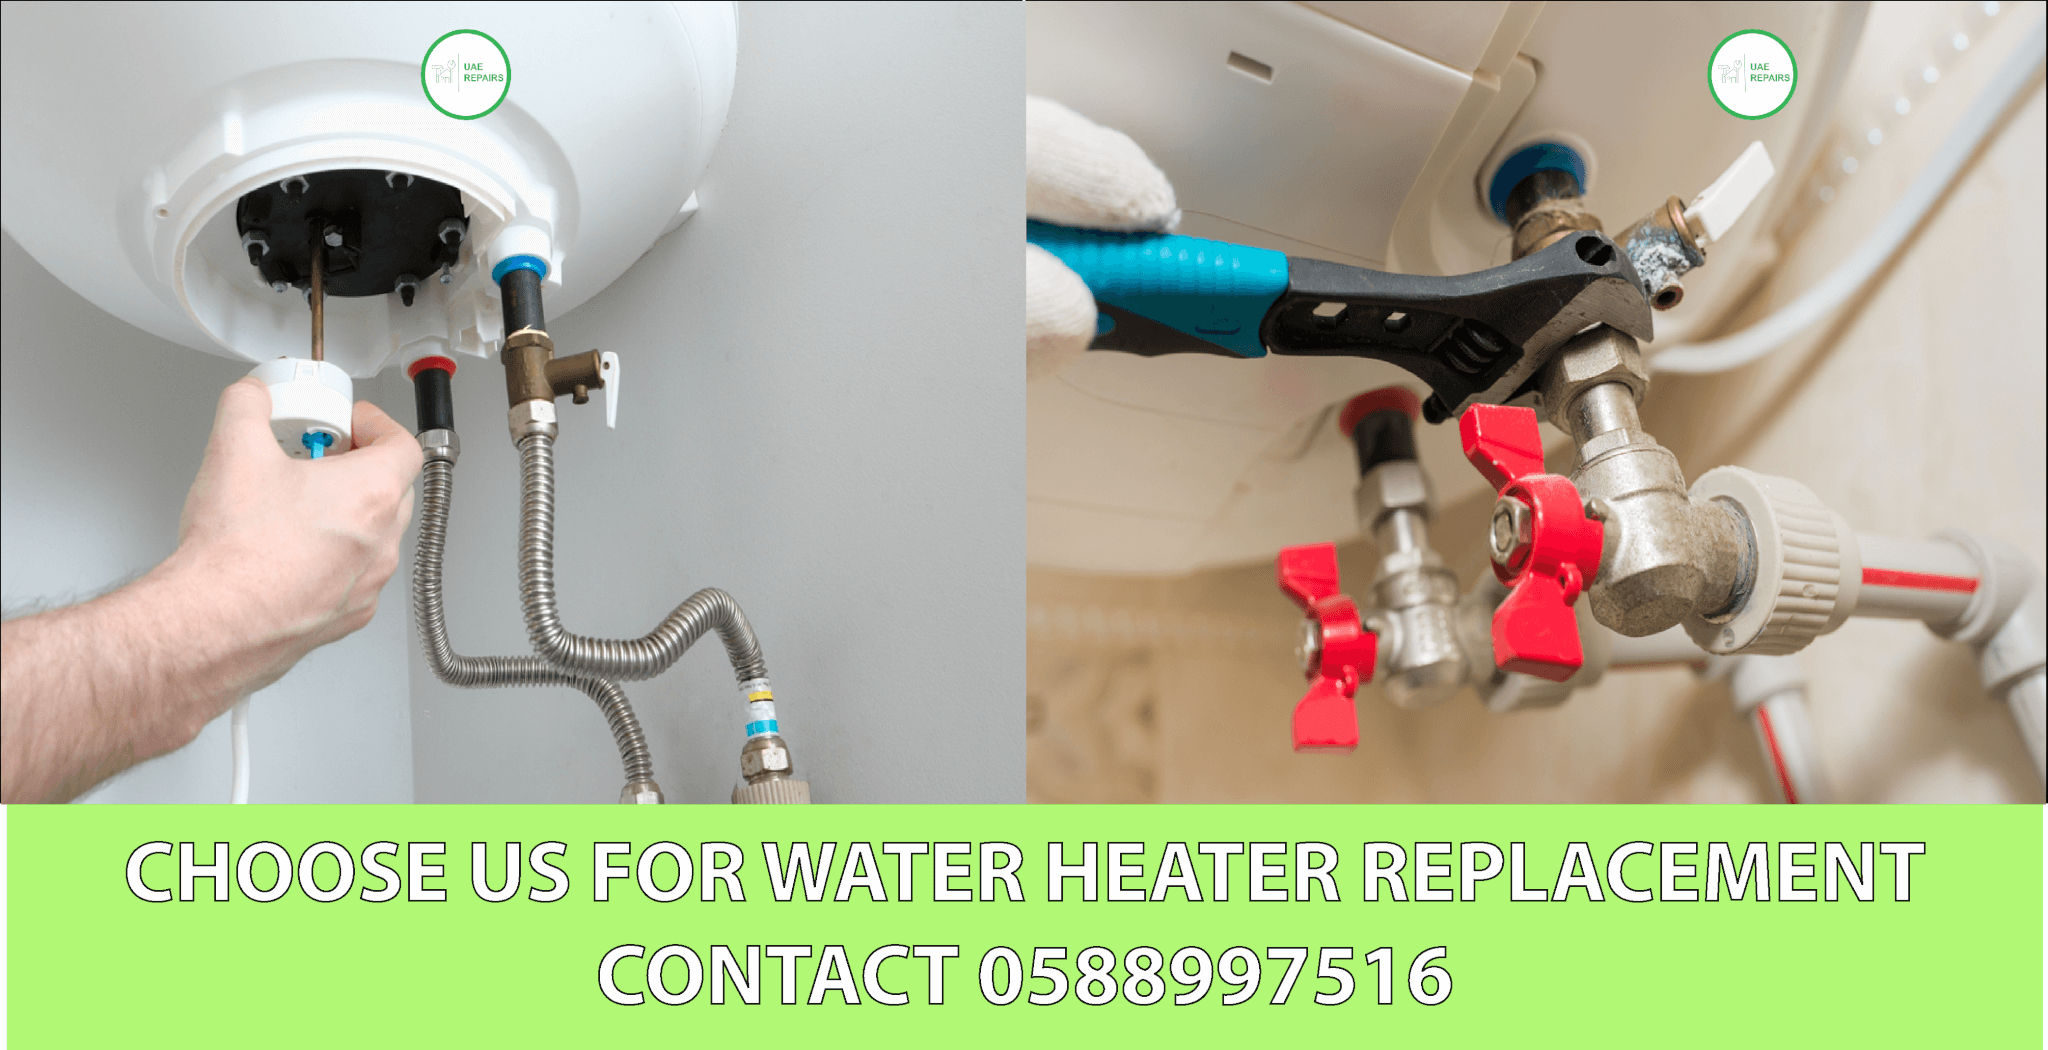 CHOOSE US FOR WATER HEATER REPALCEMENT UAE